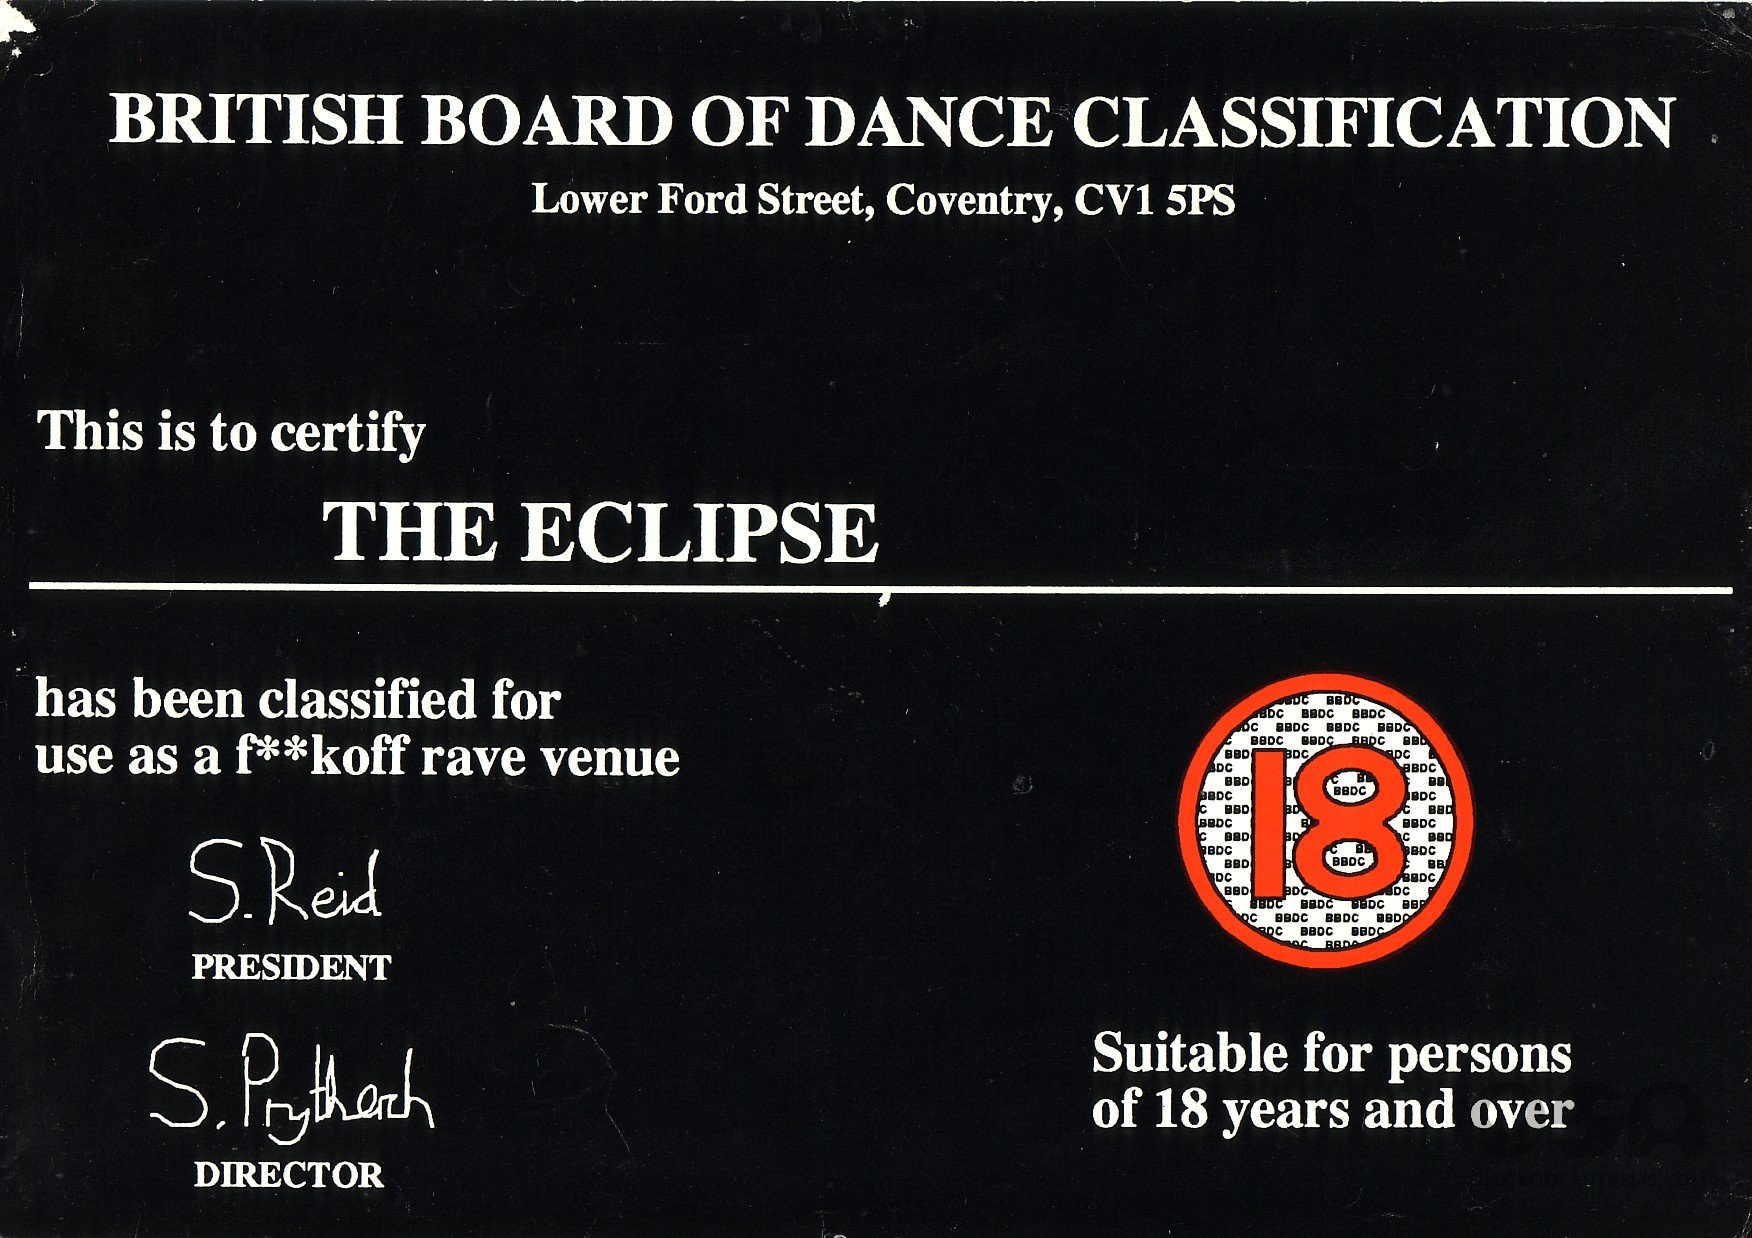 1_The_Eclipse_Coventry_Feb_Dates_92.jpg